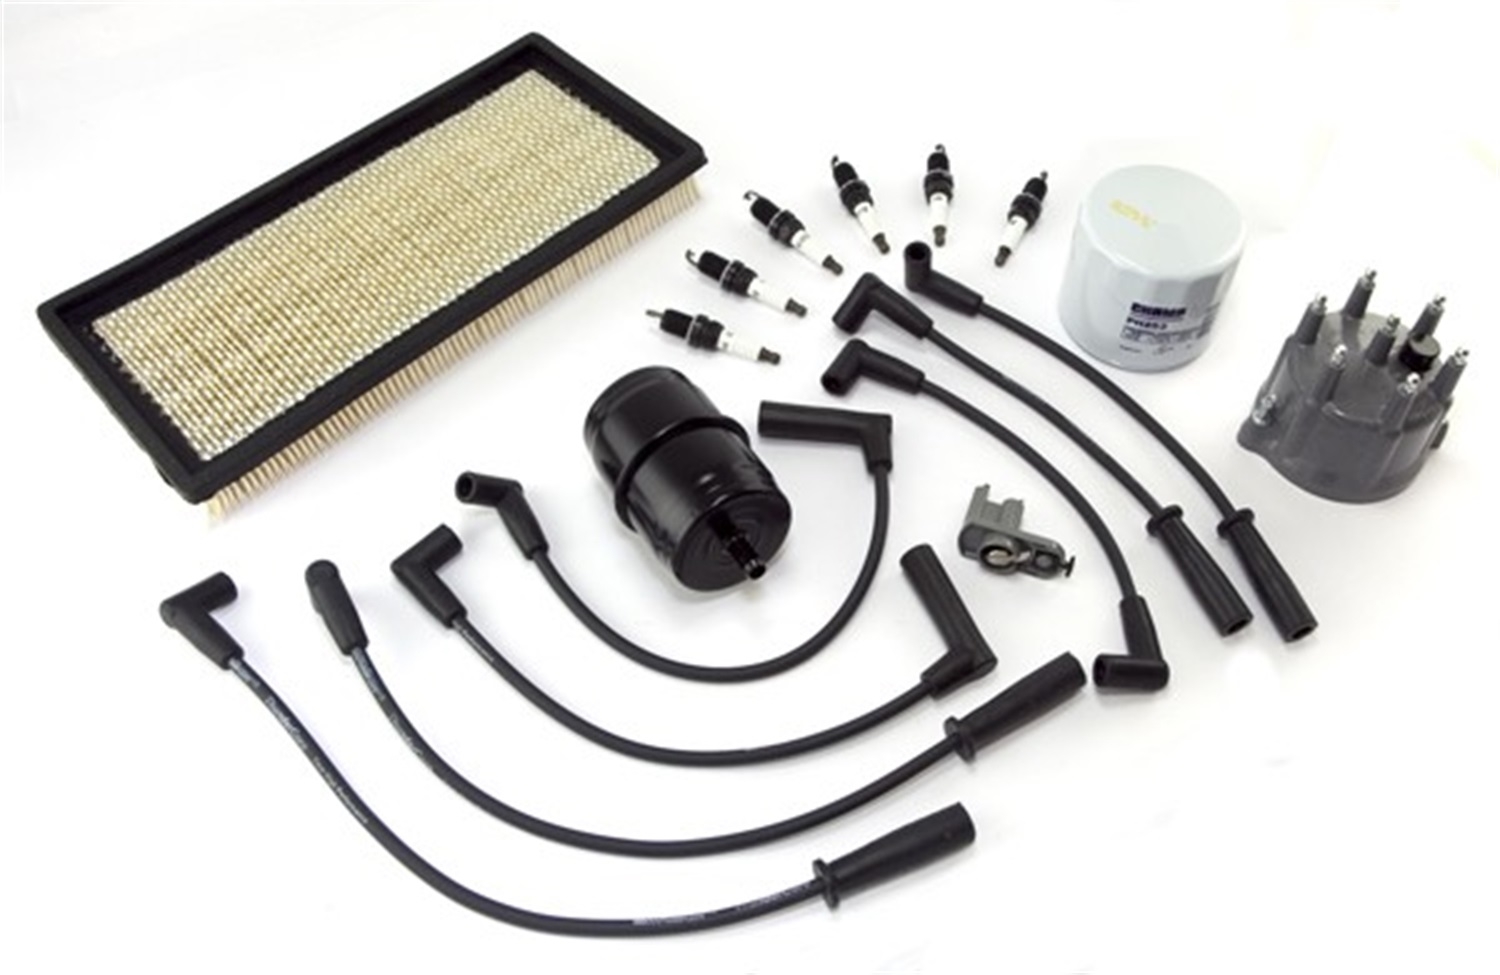 Omix Ignition Tune Up Kit, 4.0L 1991-1993 Jeep Cherokee Xj By Omix, BKGF-17256.06